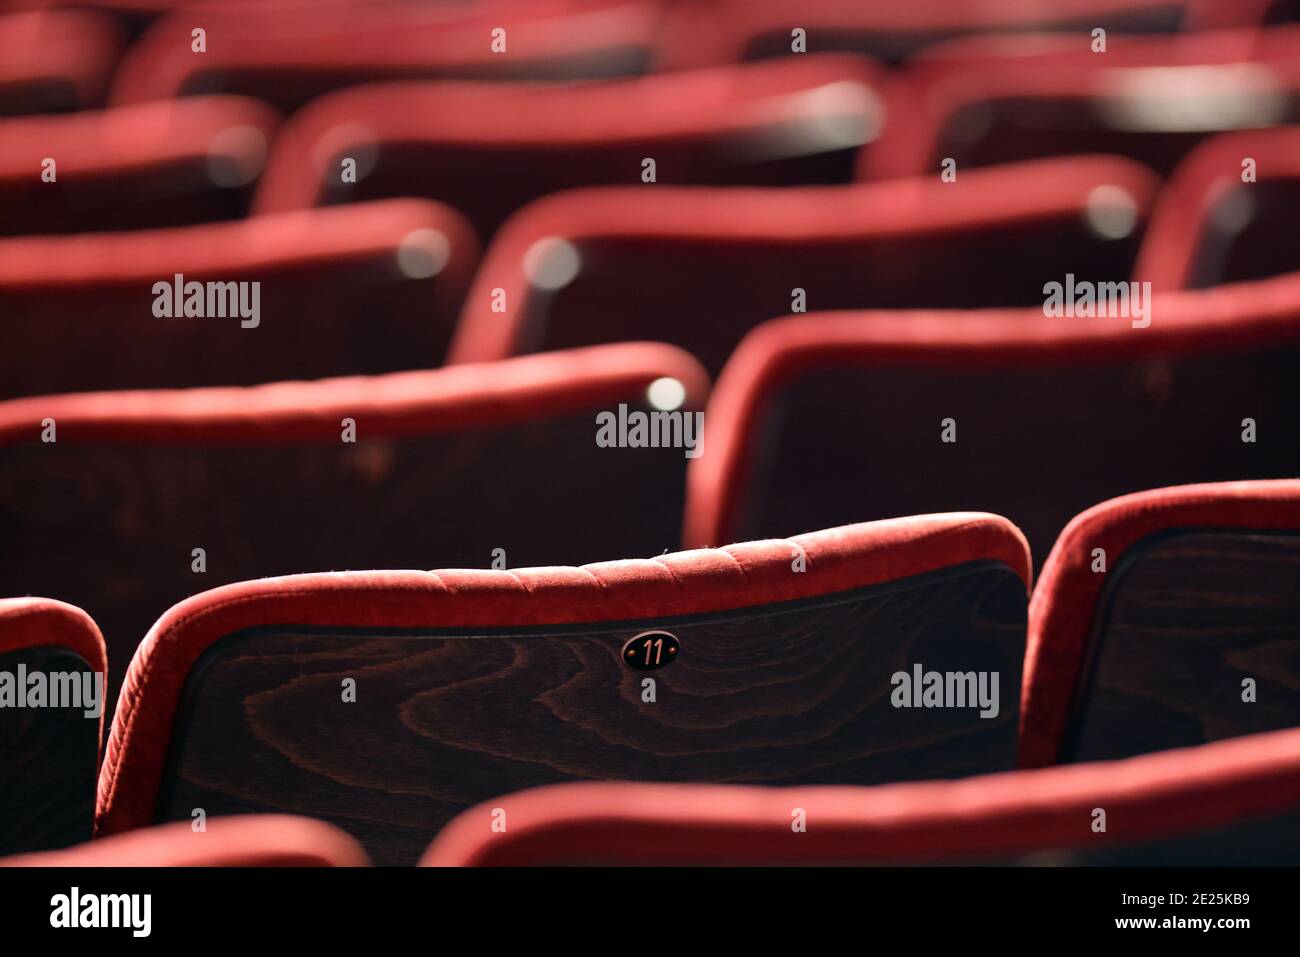 Empty red seats in theater.  Saint Gervais. France. Stock Photo